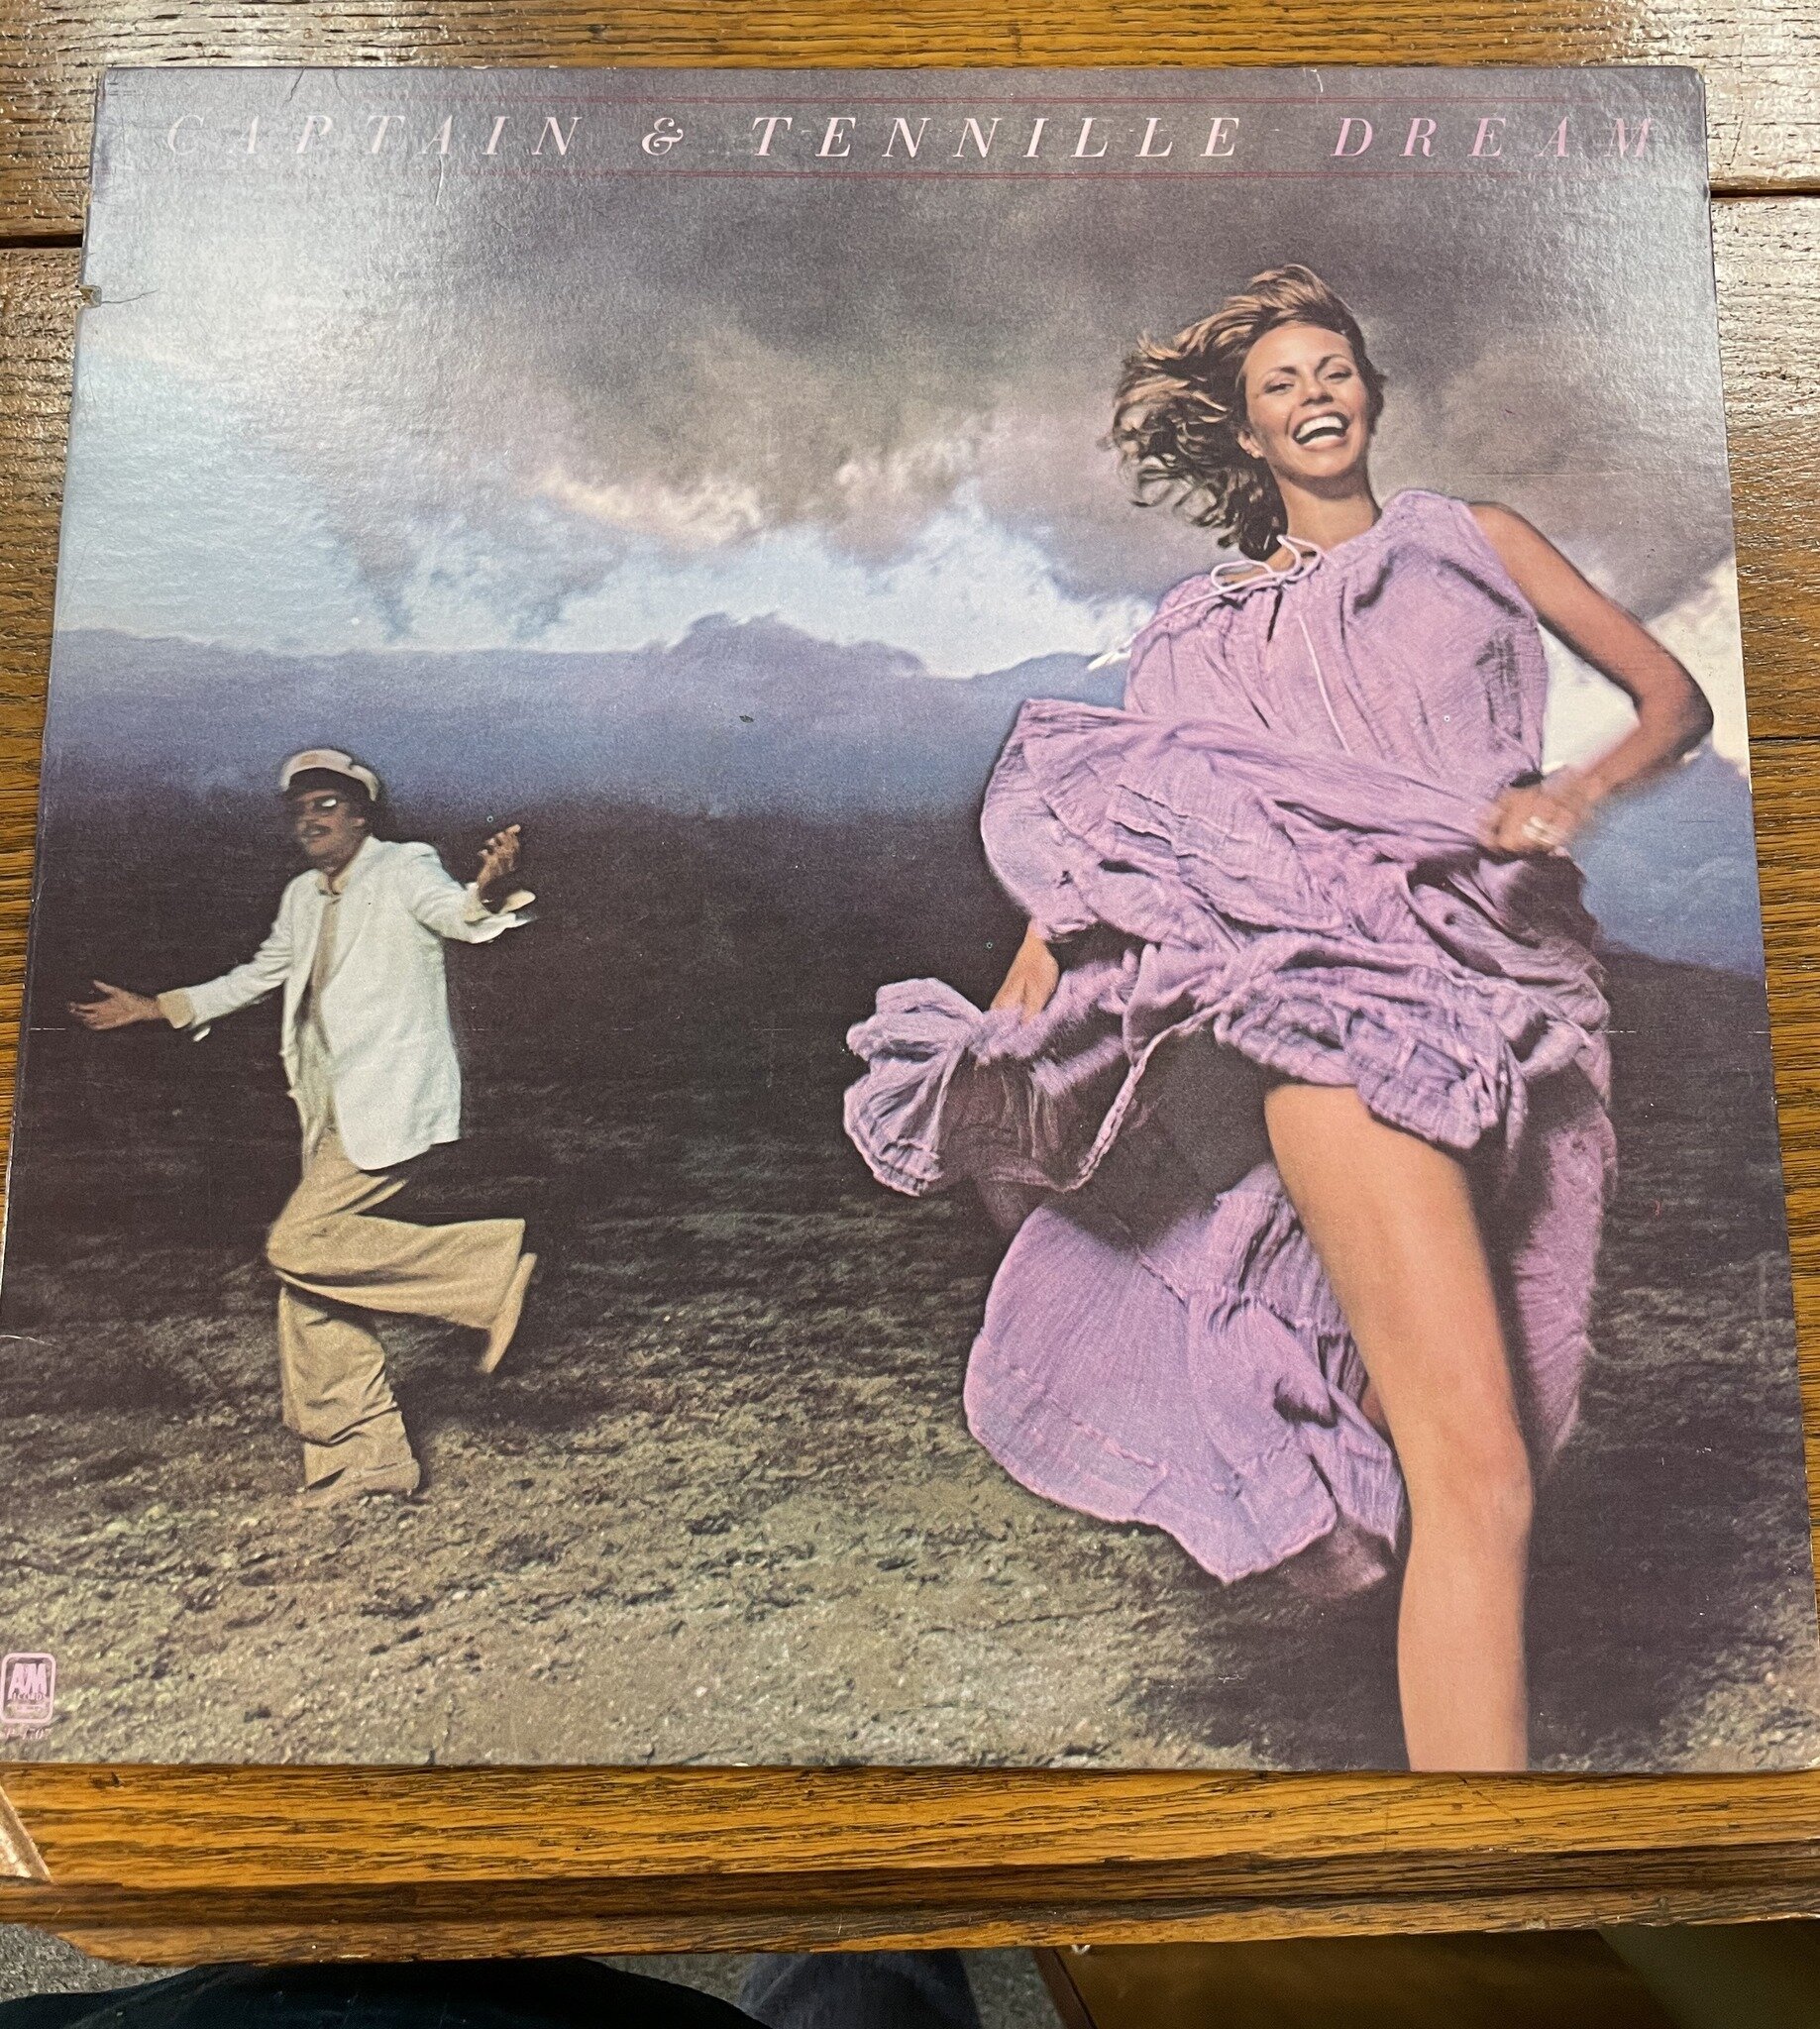 #musicmonday Captain and Tenille!  #heretodaymaybetomorrowmaybenot #antiques #decorandmore #vintage #rocantiques #roc #cdga #OMA #ontariomallantiques #vintageliving #vintage #collectibles #vintageny #antiquesnewyork
#rocantiques #vinyl #recordalbums